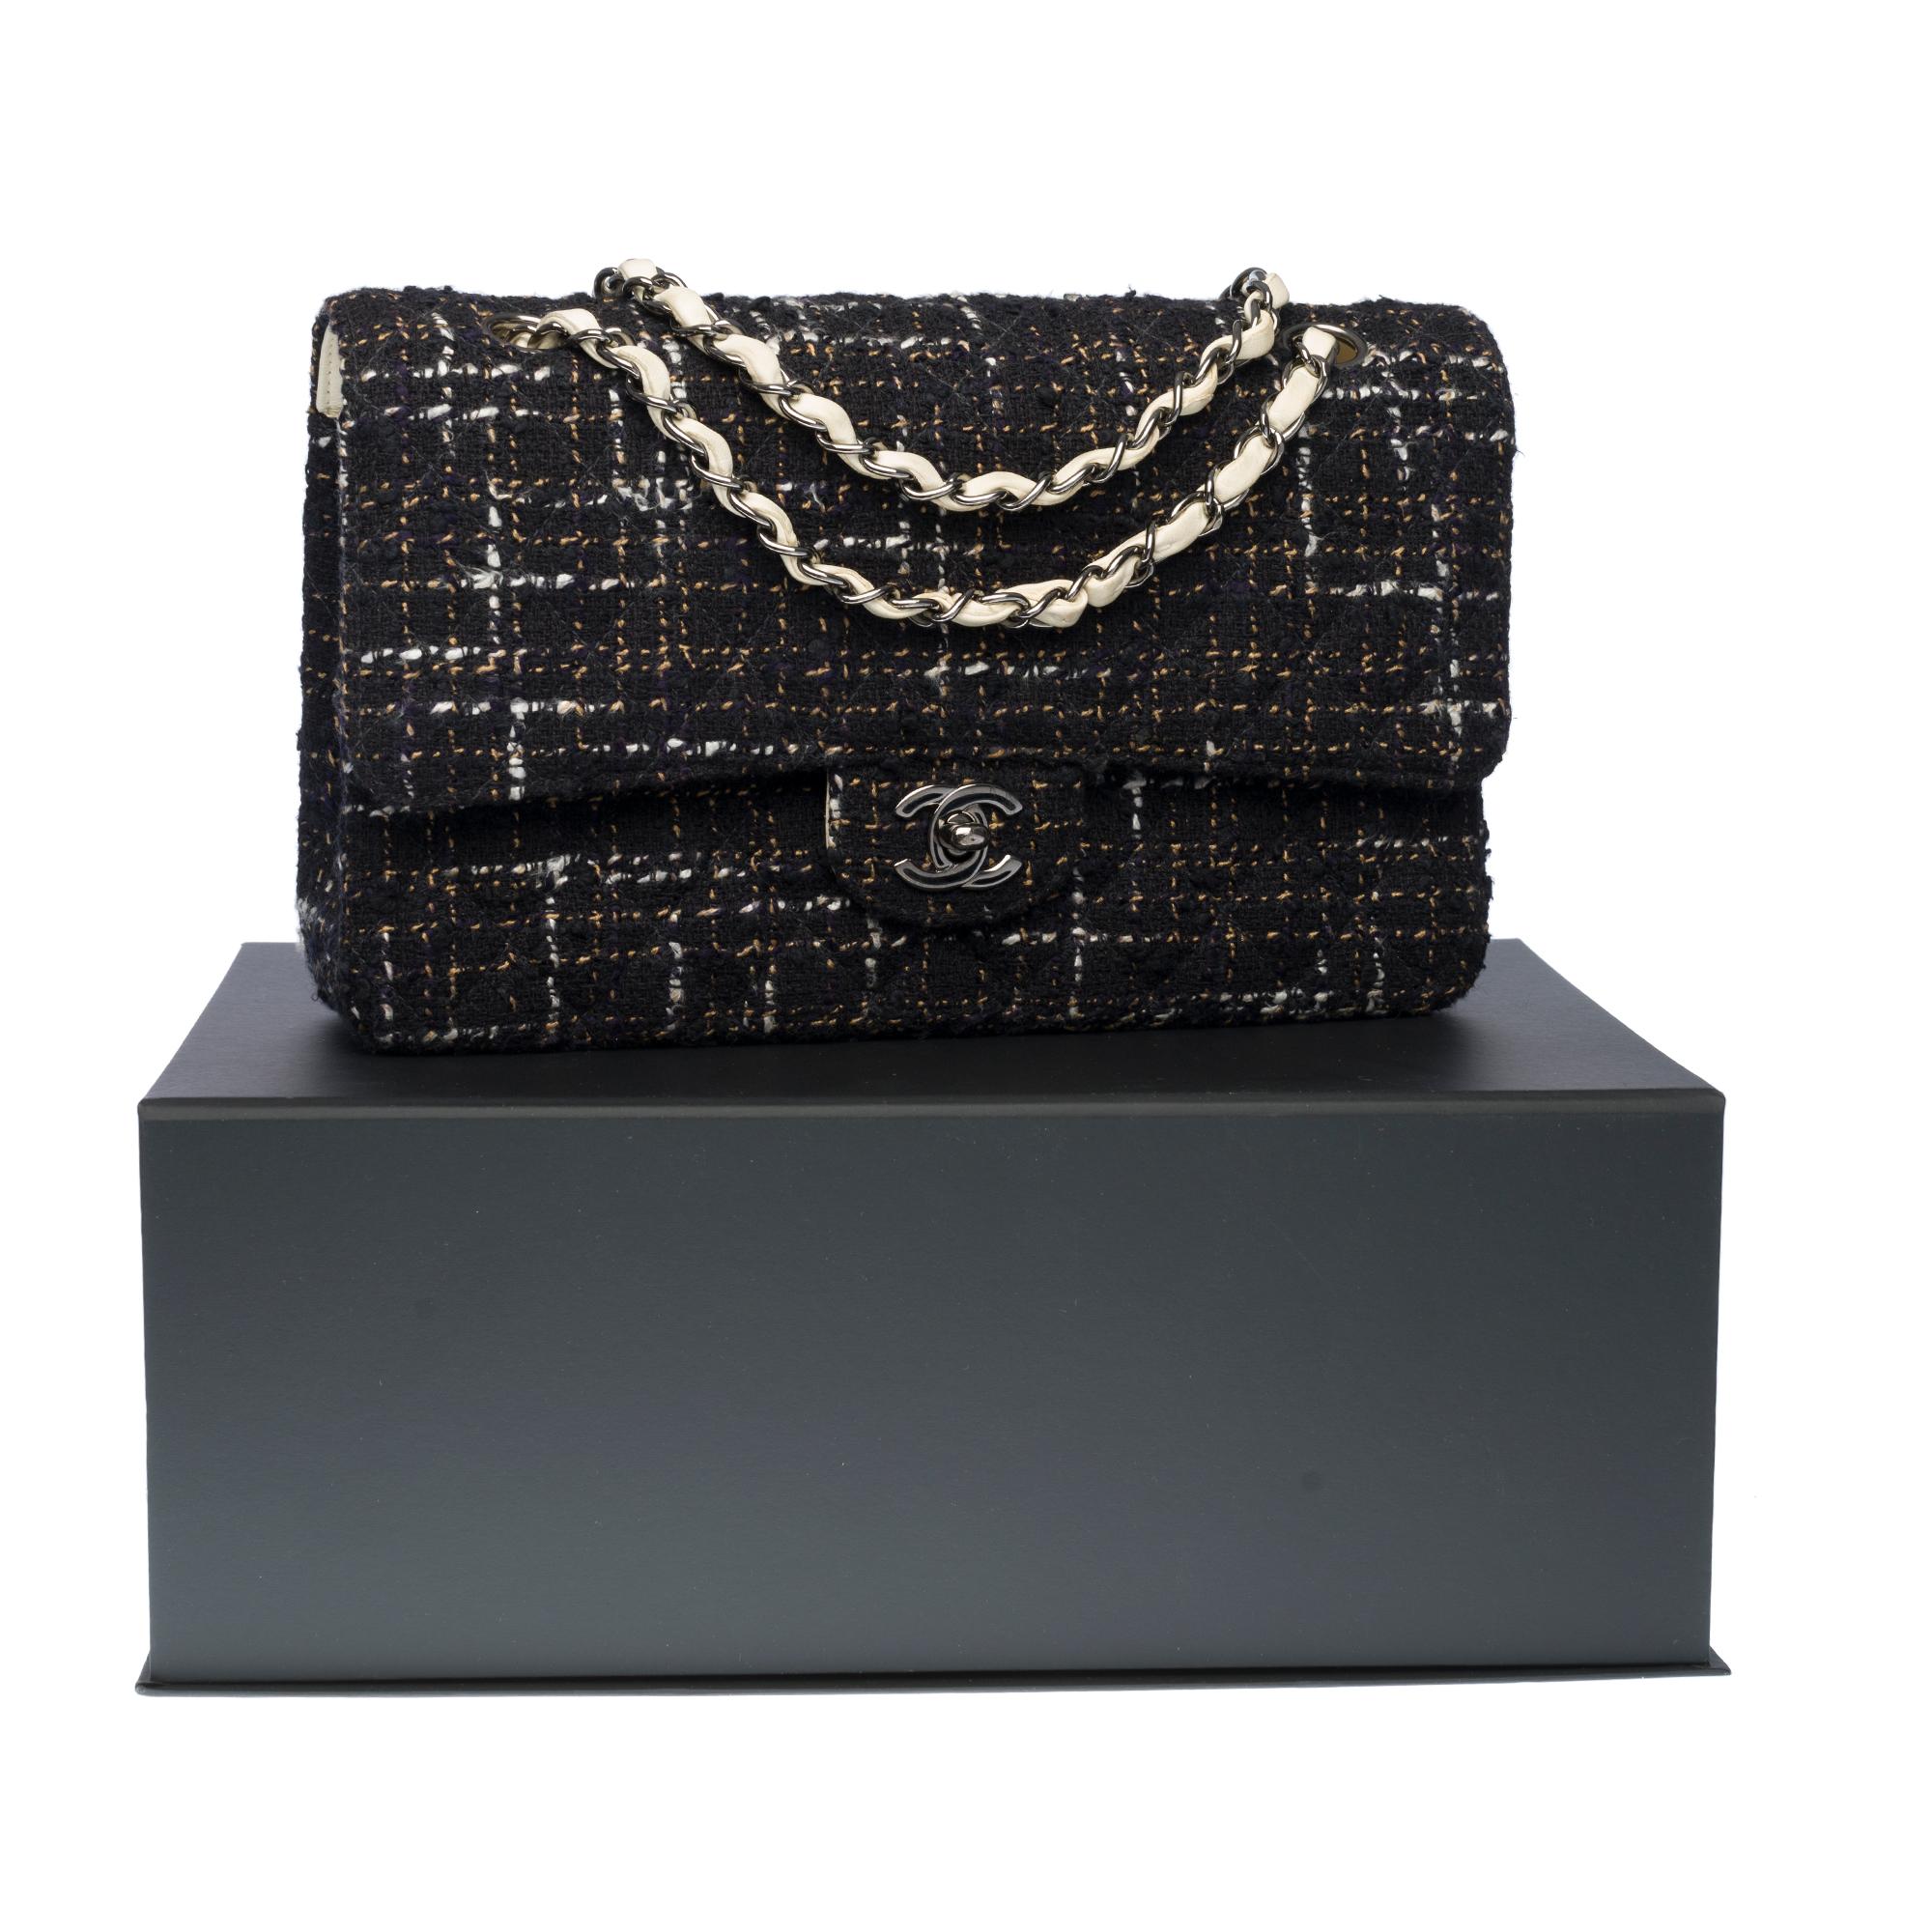 Limited Edition Chanel Timeless Shoulder bag in black & white Tweed with SHW 4